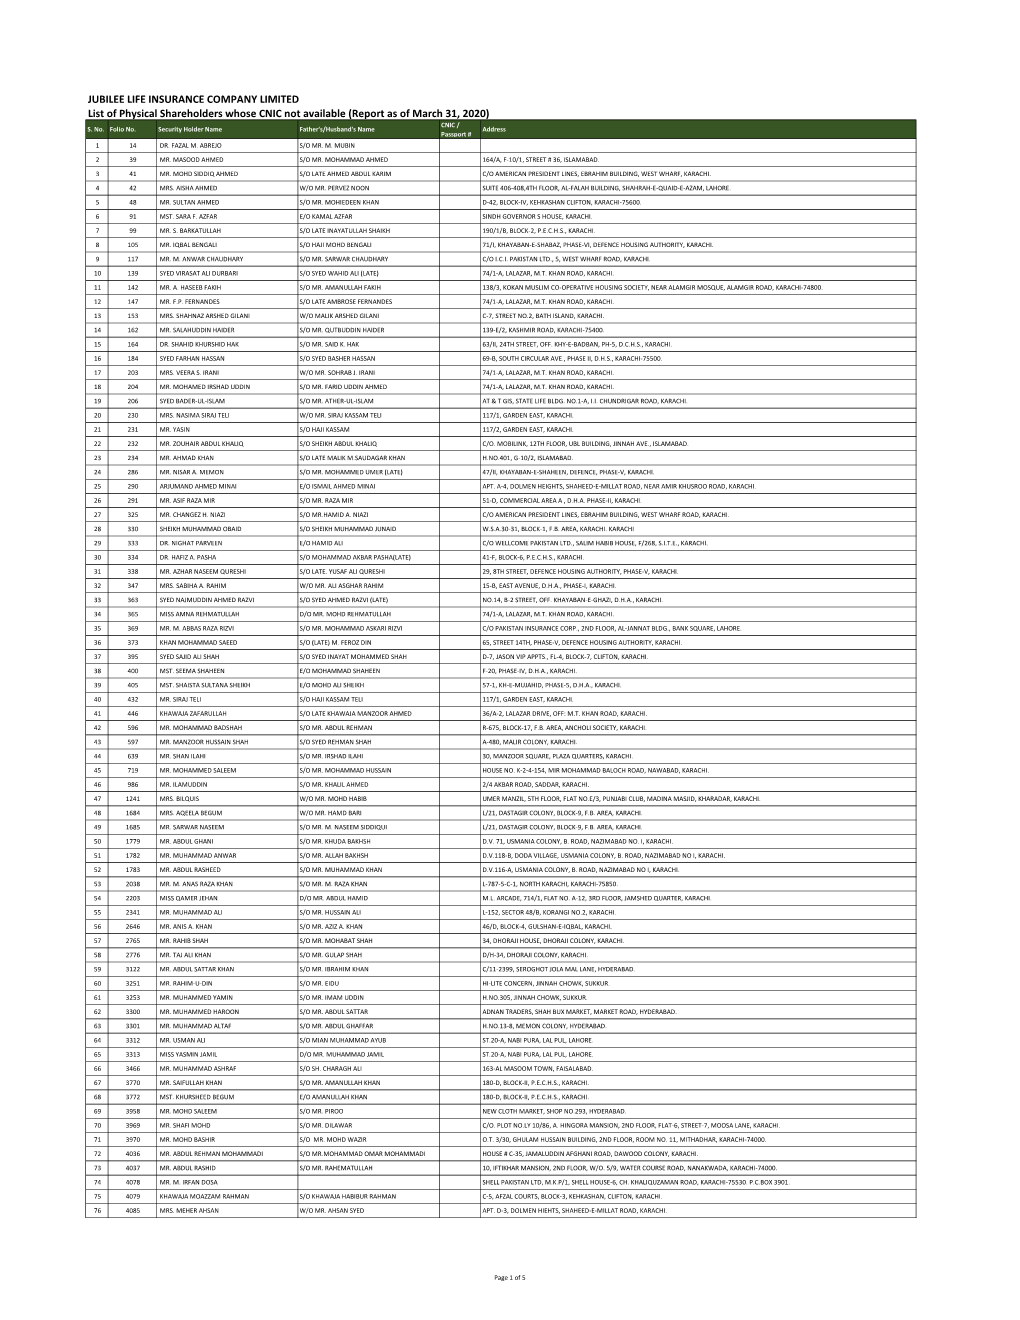 JUBILEE LIFE INSURANCE COMPANY LIMITED List of Physical Shareholders Whose CNIC Not Available (Report As of March 31, 2020) CNIC / S